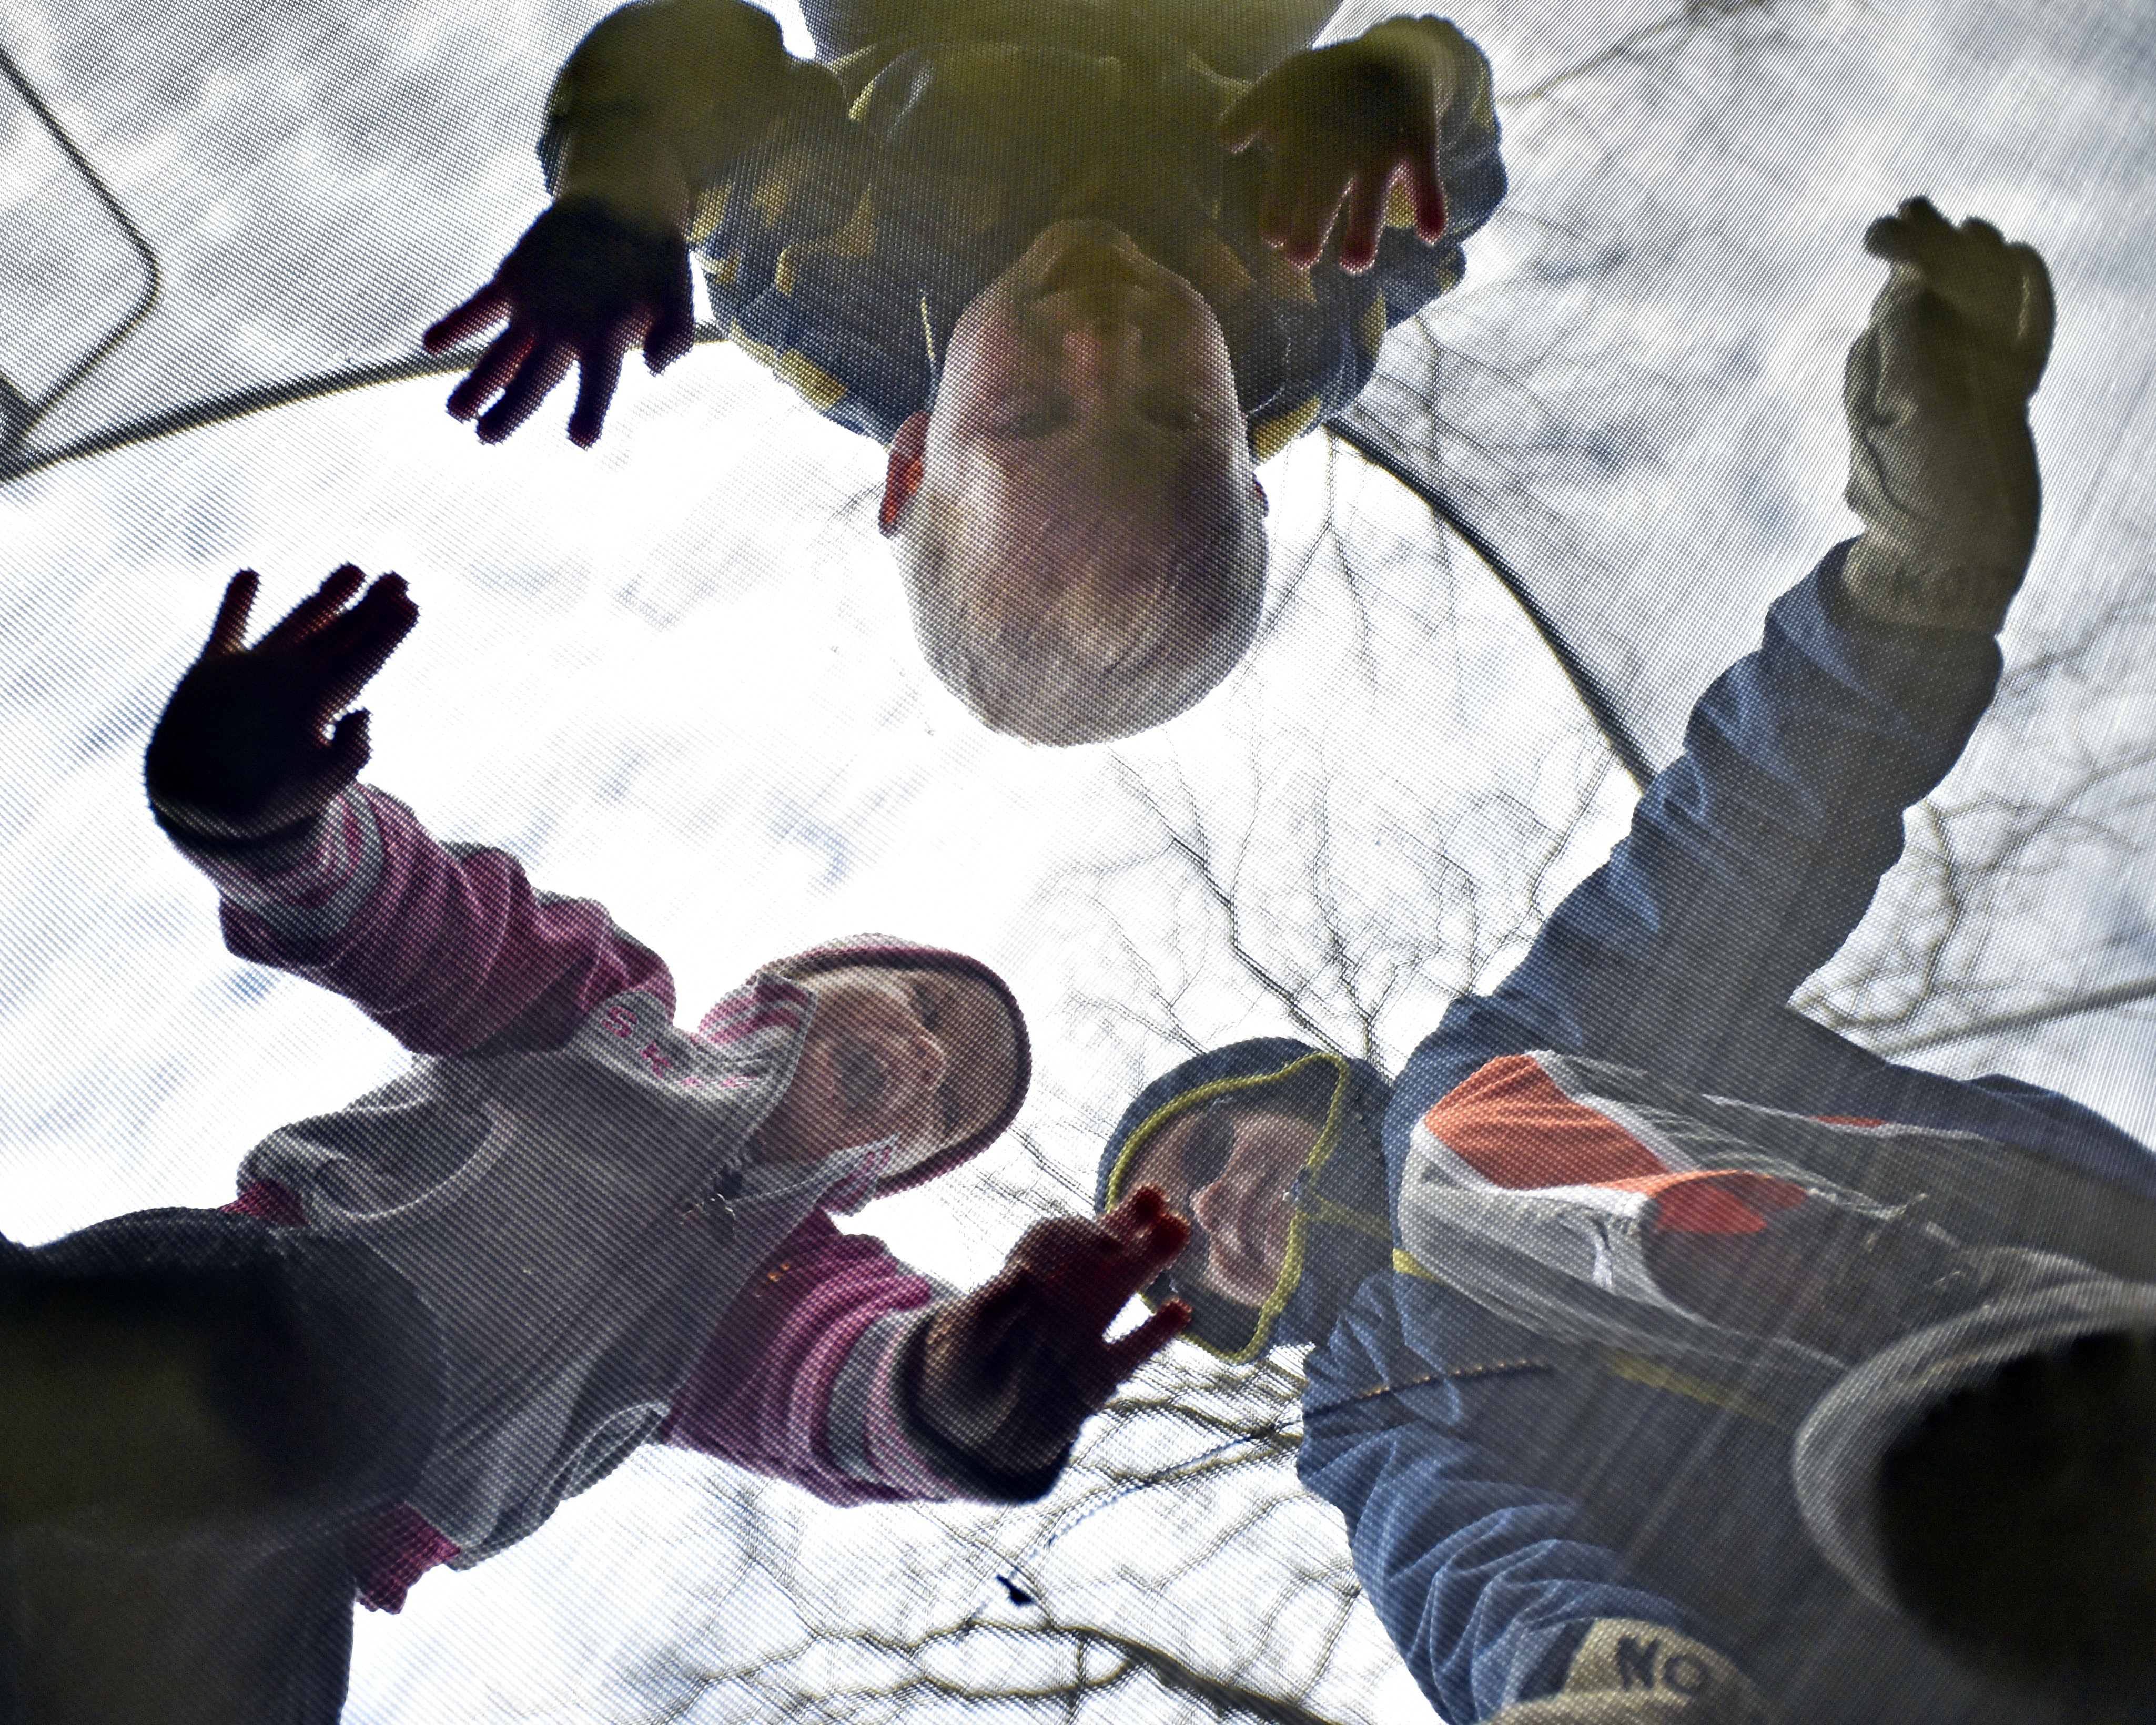 Kolton Montague, right, 5, jumps on a trampoline in the backyard of his home in Avon, N.Y., with his  siblings Kellan, top, and Kaelyn, left, both 2, on Nov. 16, 2014.